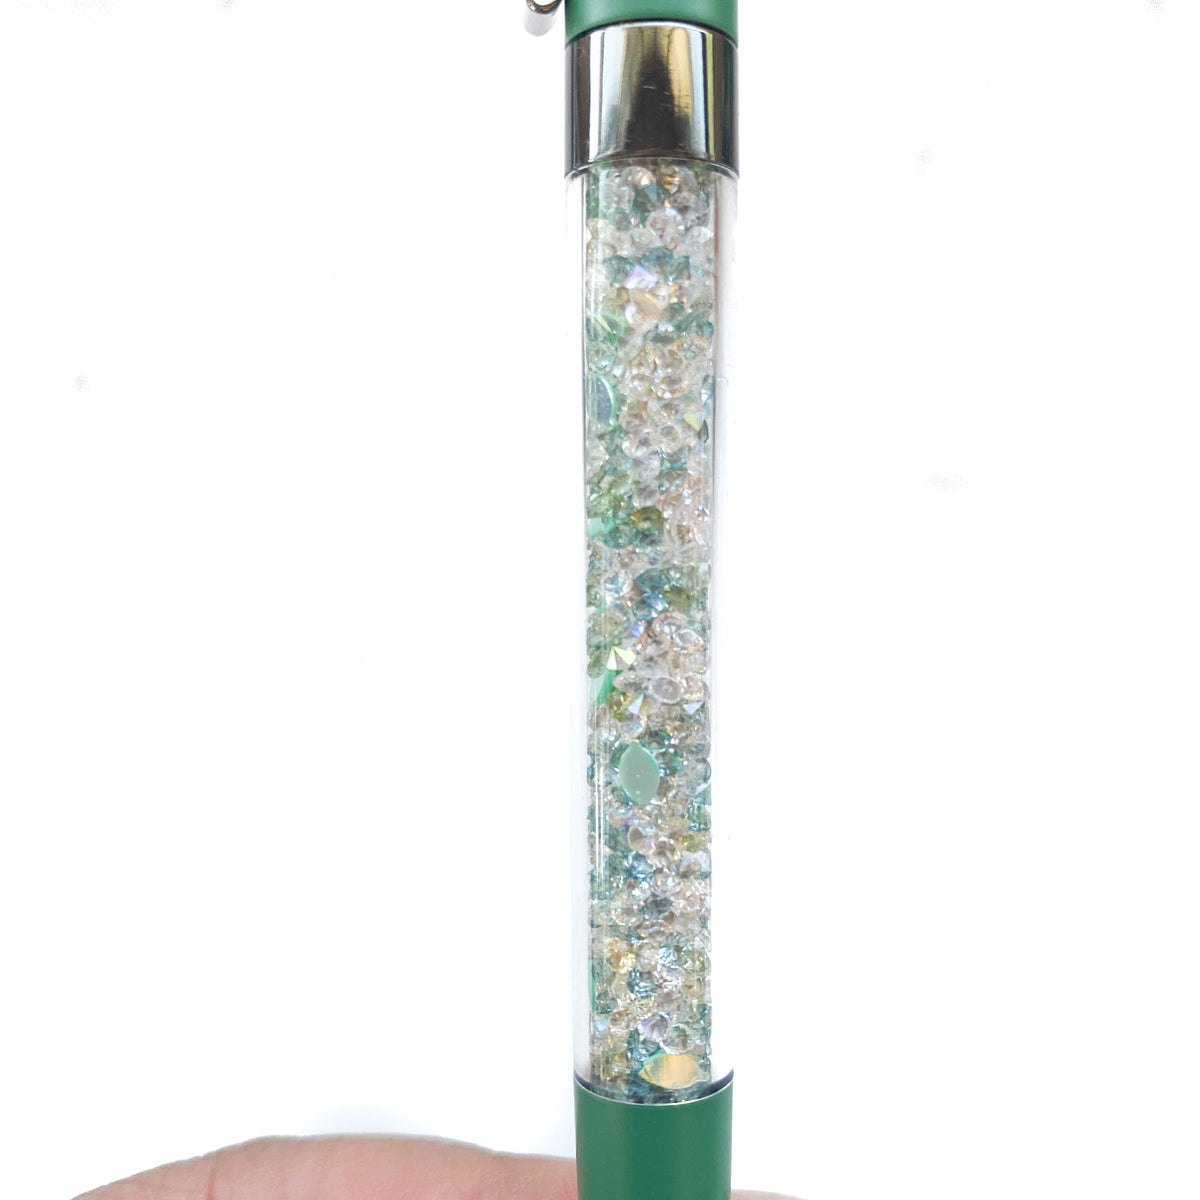 Plant Daddy Imperfect Crystal VBPen | limited kit pen